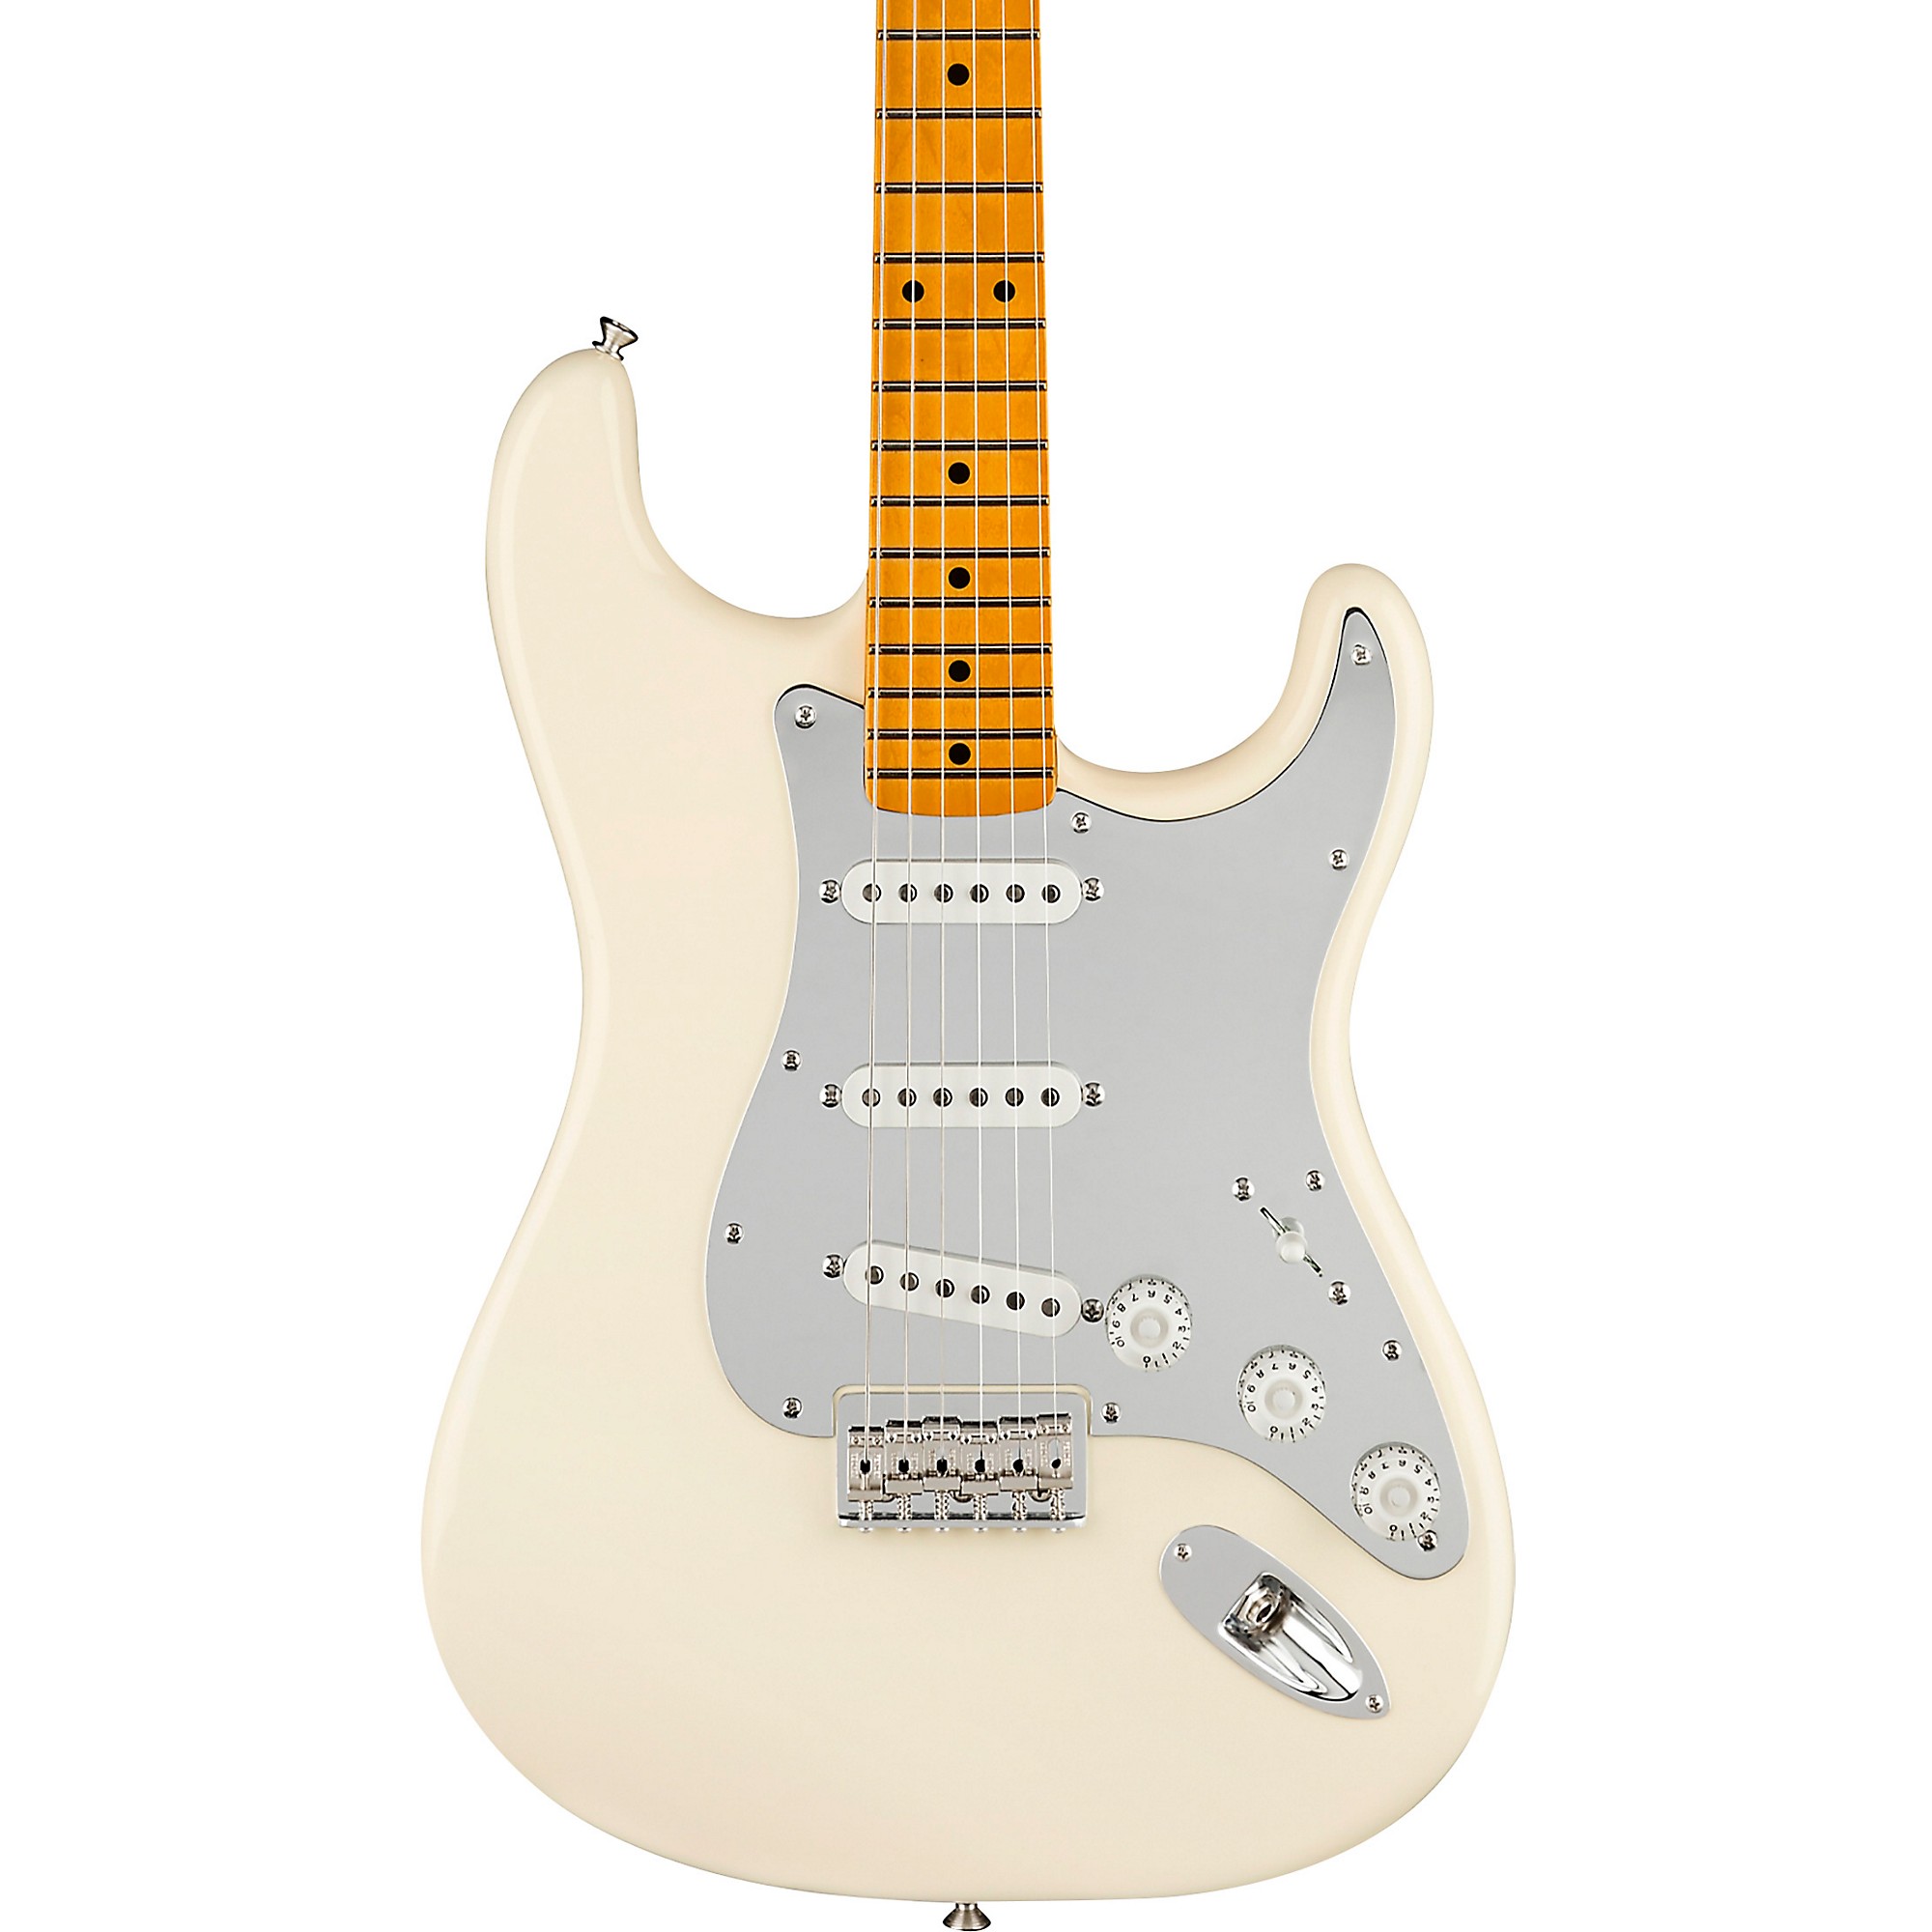 security wheat questionnaire Fender Nile Rodgers Hitmaker Stratocaster Maple Fingerboard Electric Guitar  Olympic White | Guitar Center